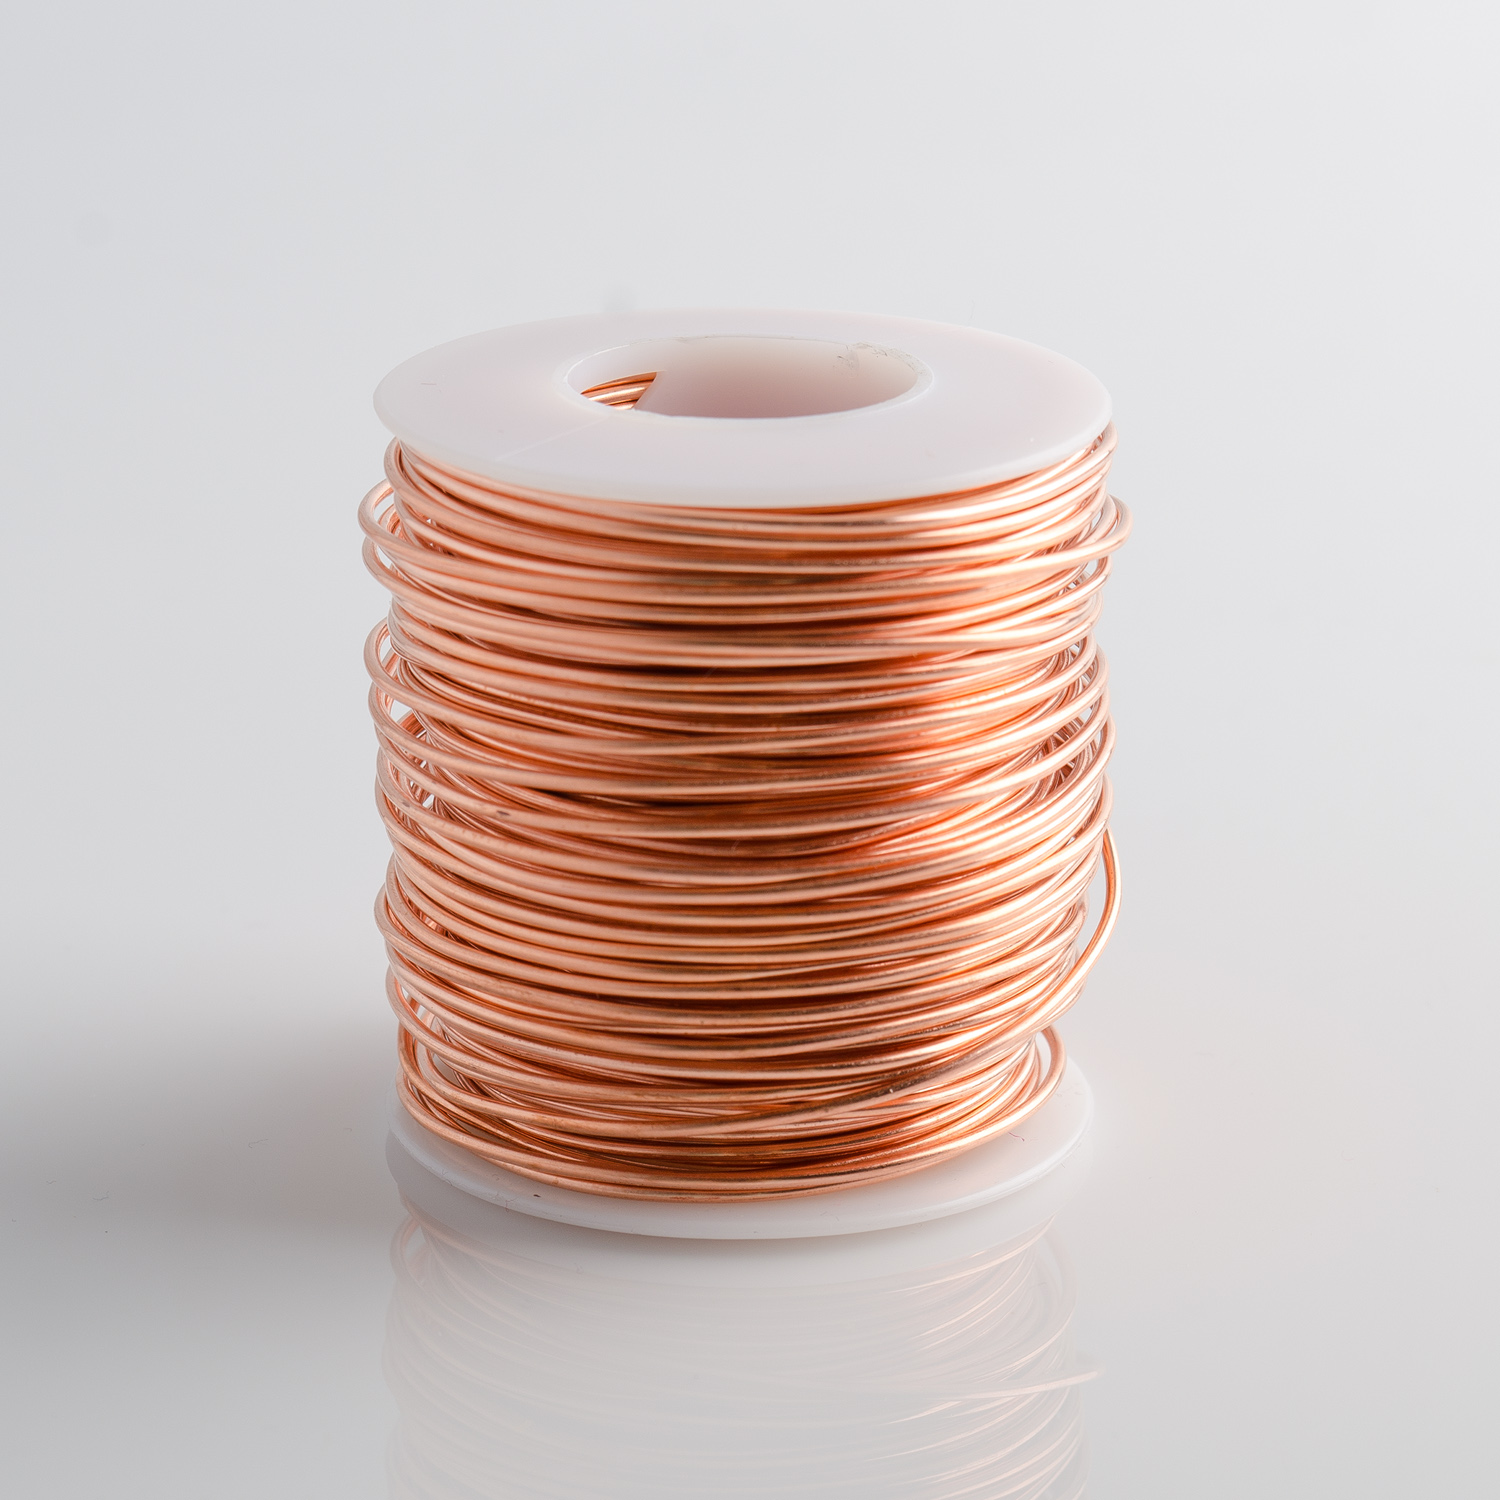 20 Gauge Round Dead Soft Copper Wire - 1LB: Jewelry Making Supplies, Instructions